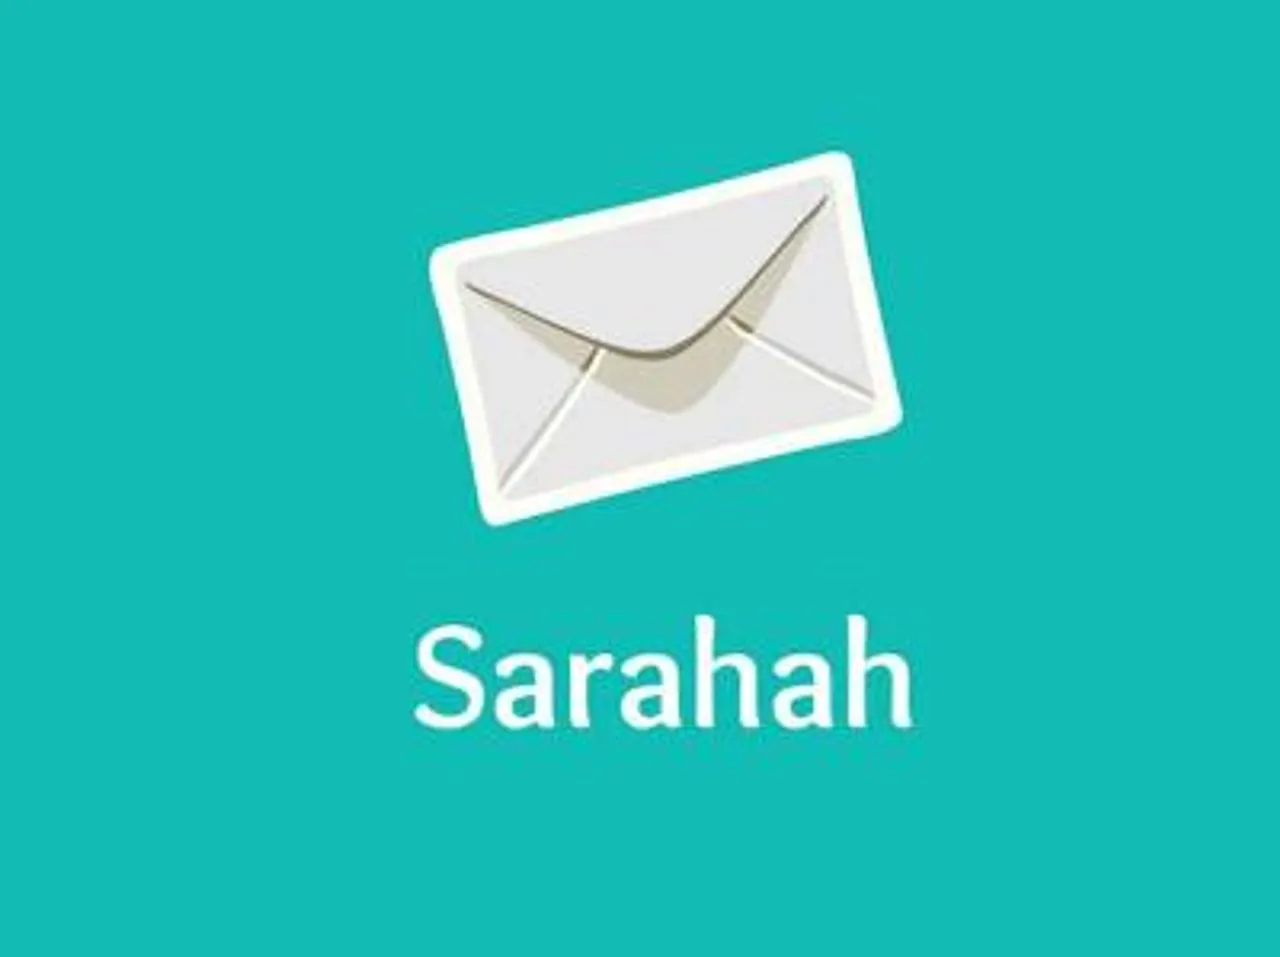 Have you Downloaded Sarahah, the Latest App Sensation in town?